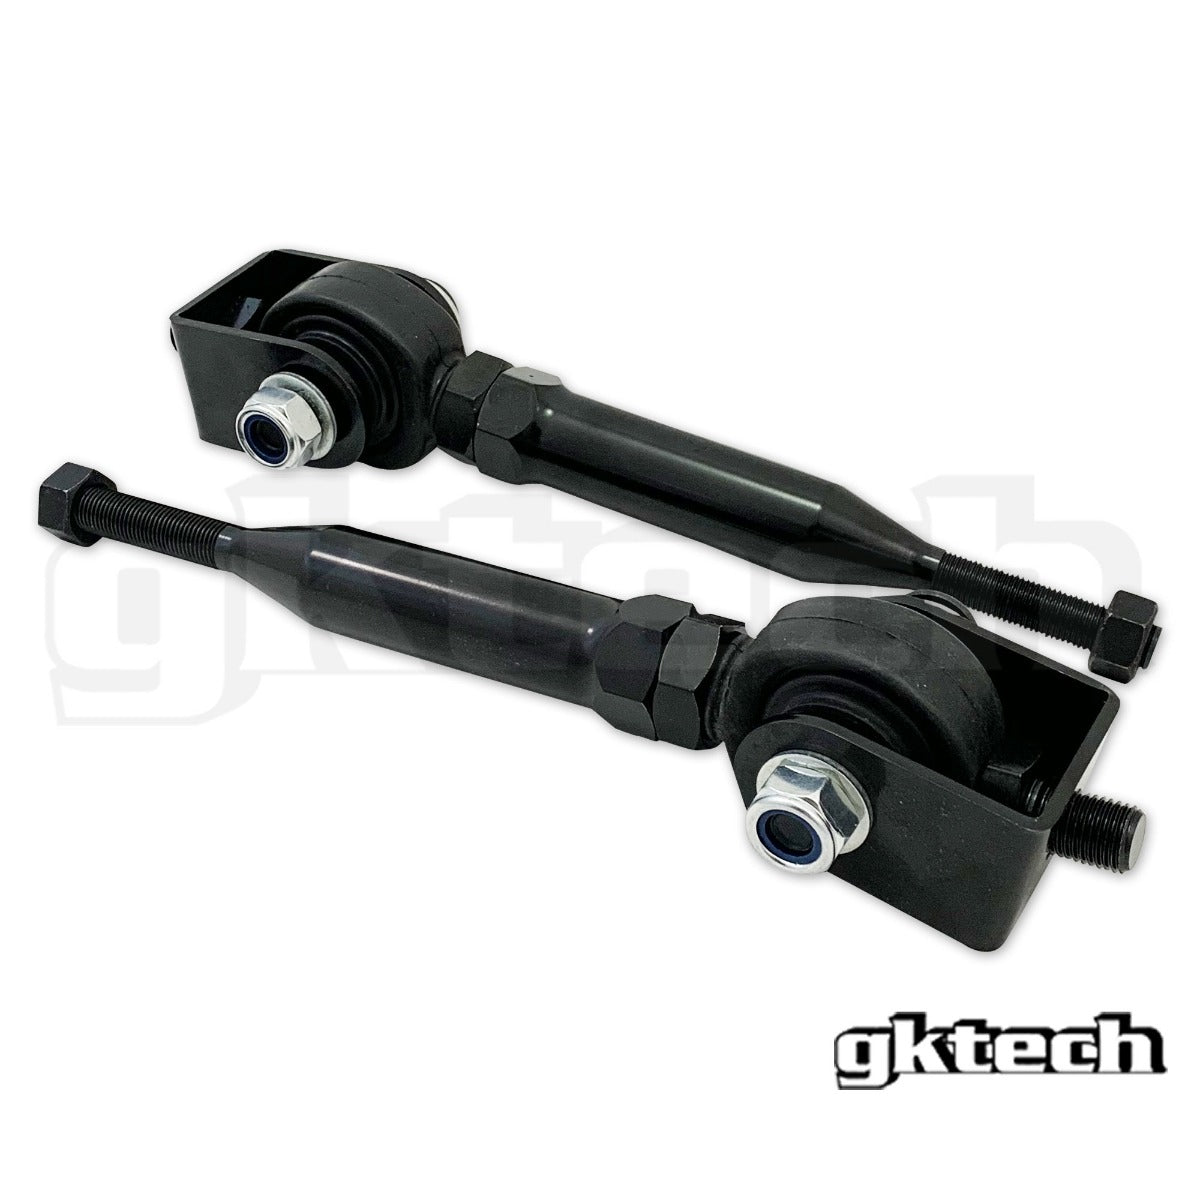 S13 240sx/R32 HICAS Tie rod Replacement Kit